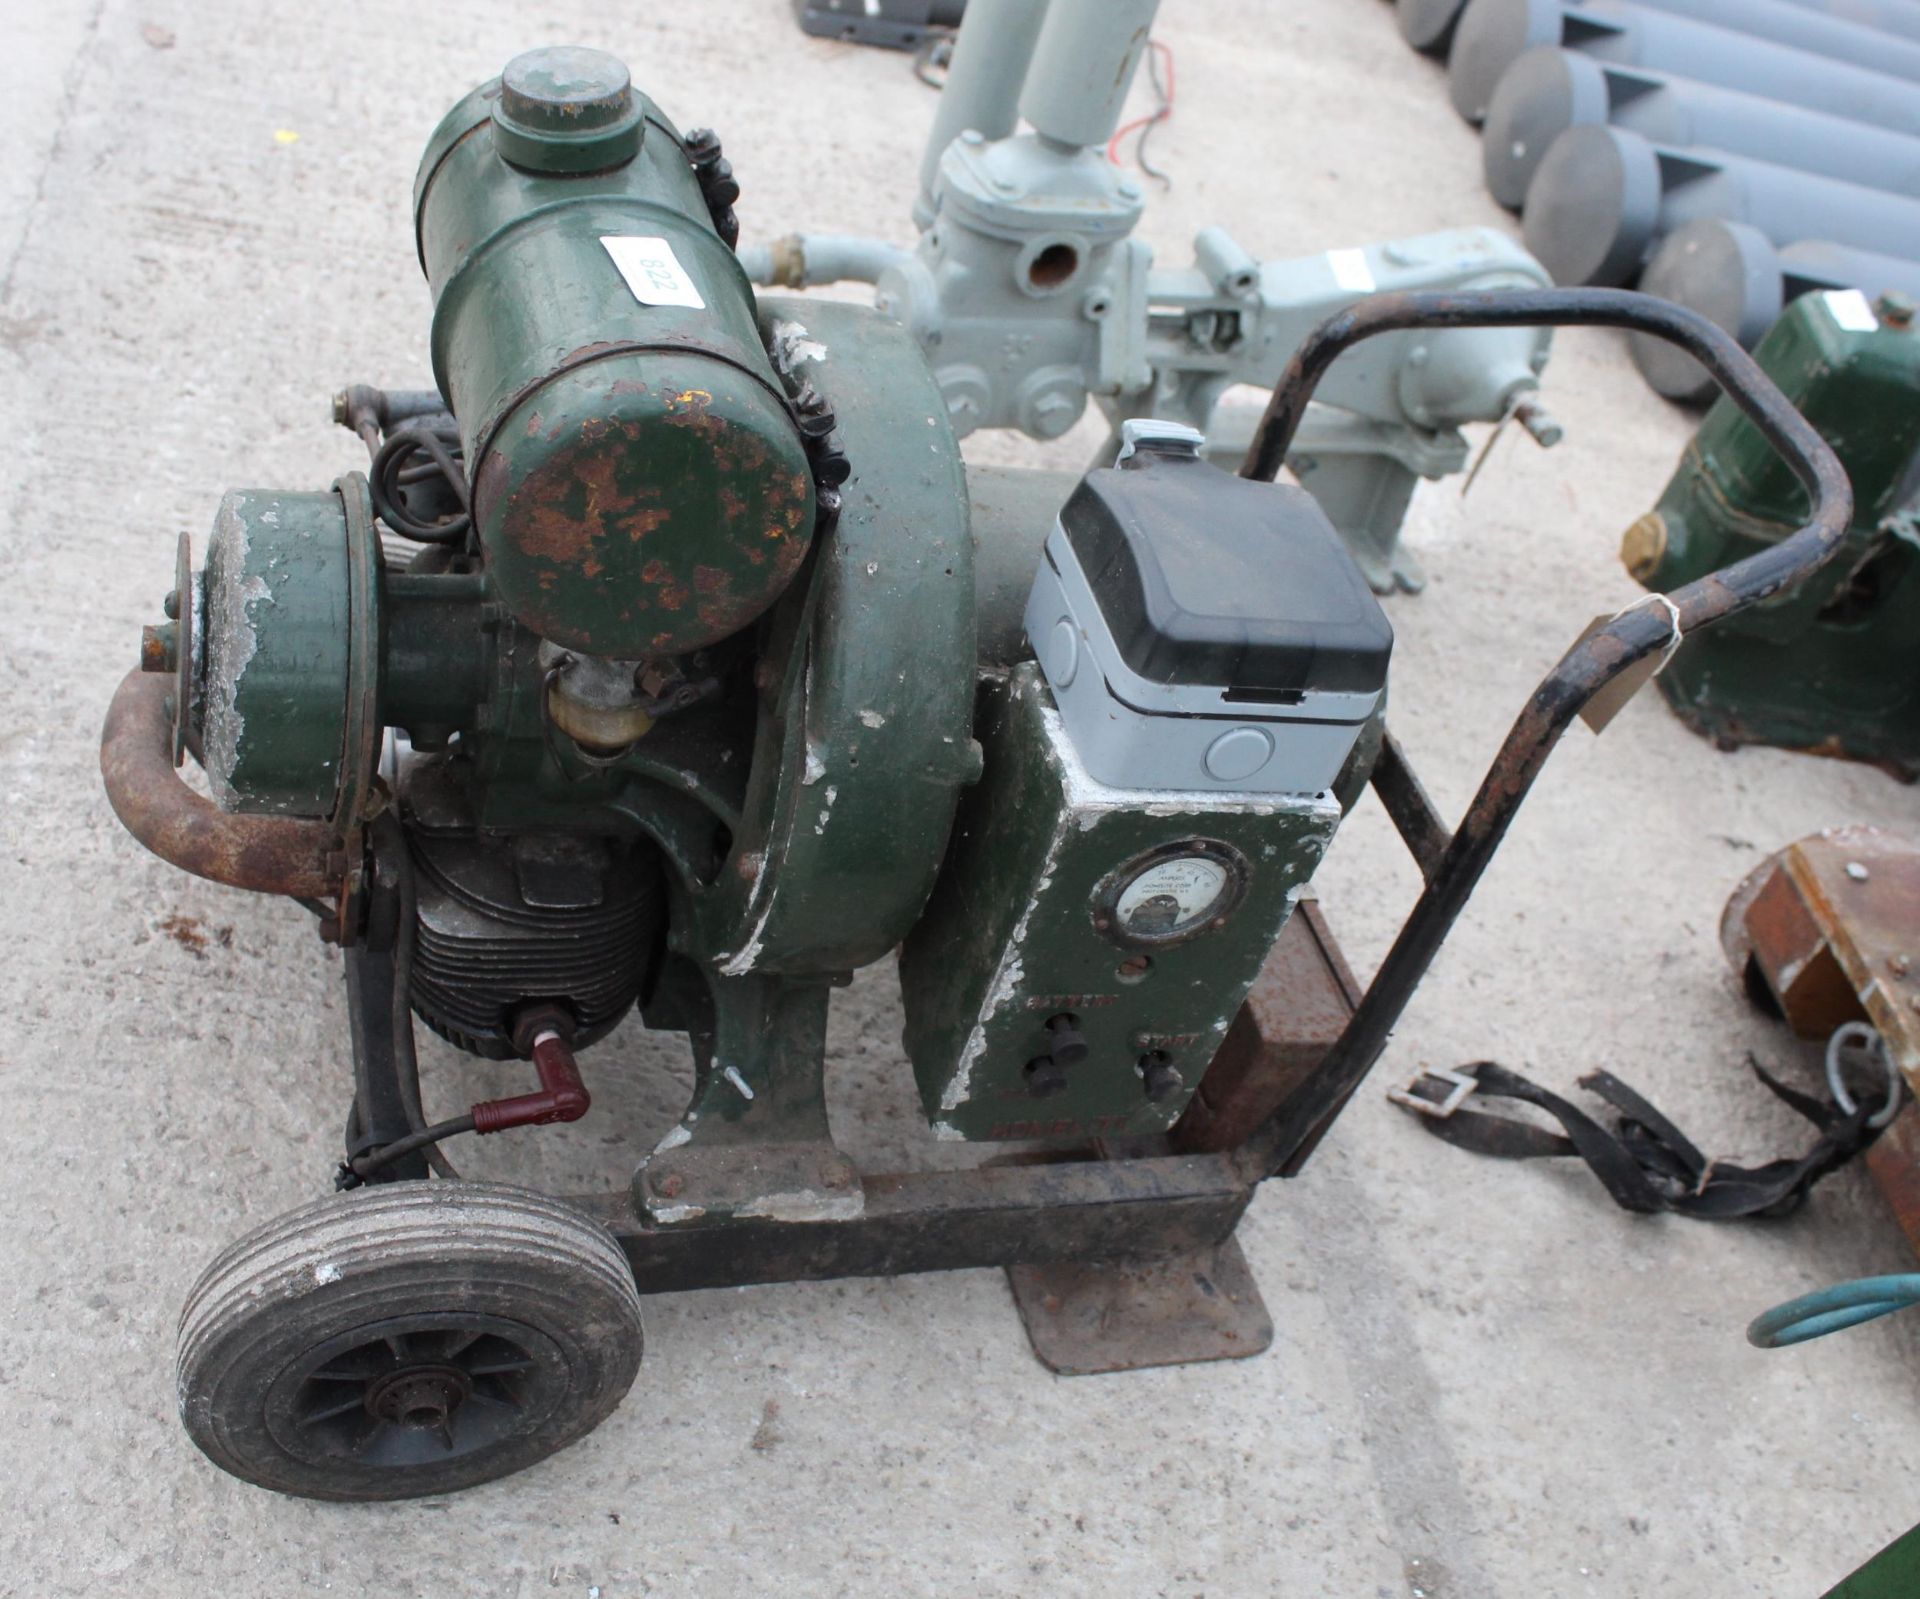 A VINTAGE HOMELITE PETROL GENERATOR ON A FOUR WHEELED TROLLEY BASE (MODERN ELECTRICAL ADDITIONS) - Image 2 of 3